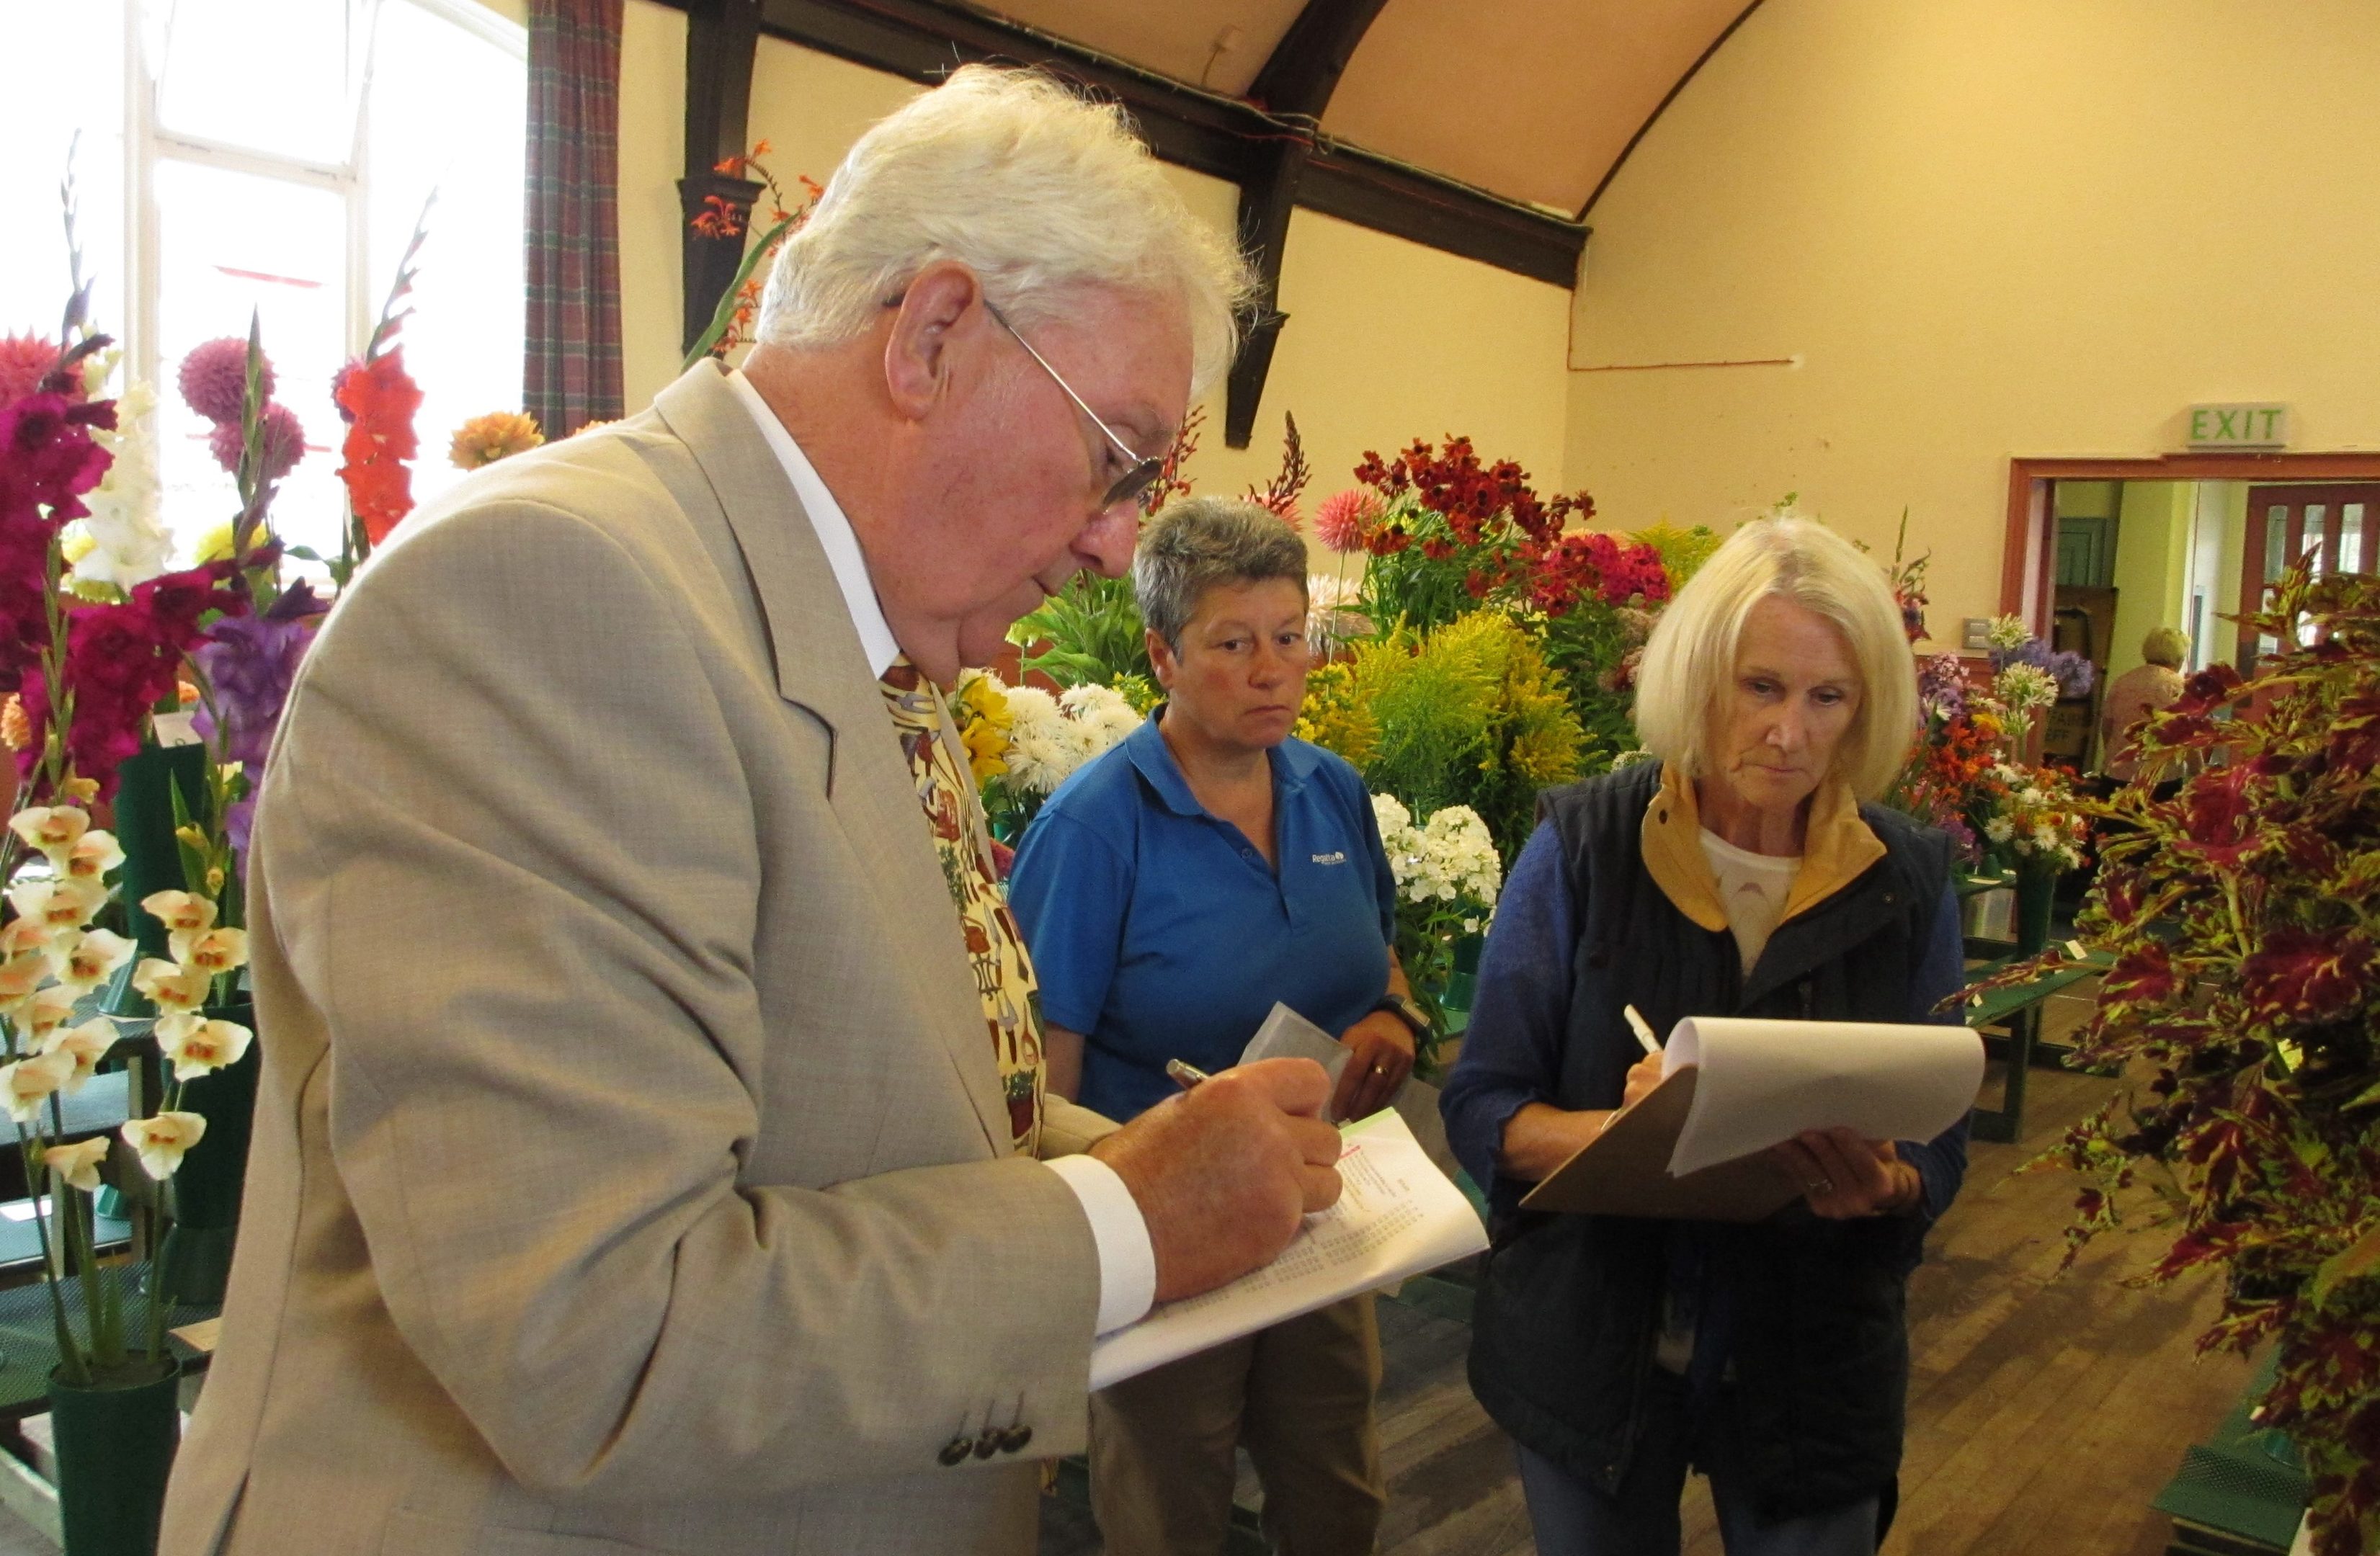 Judges oversee the entries at the RHS flower show.